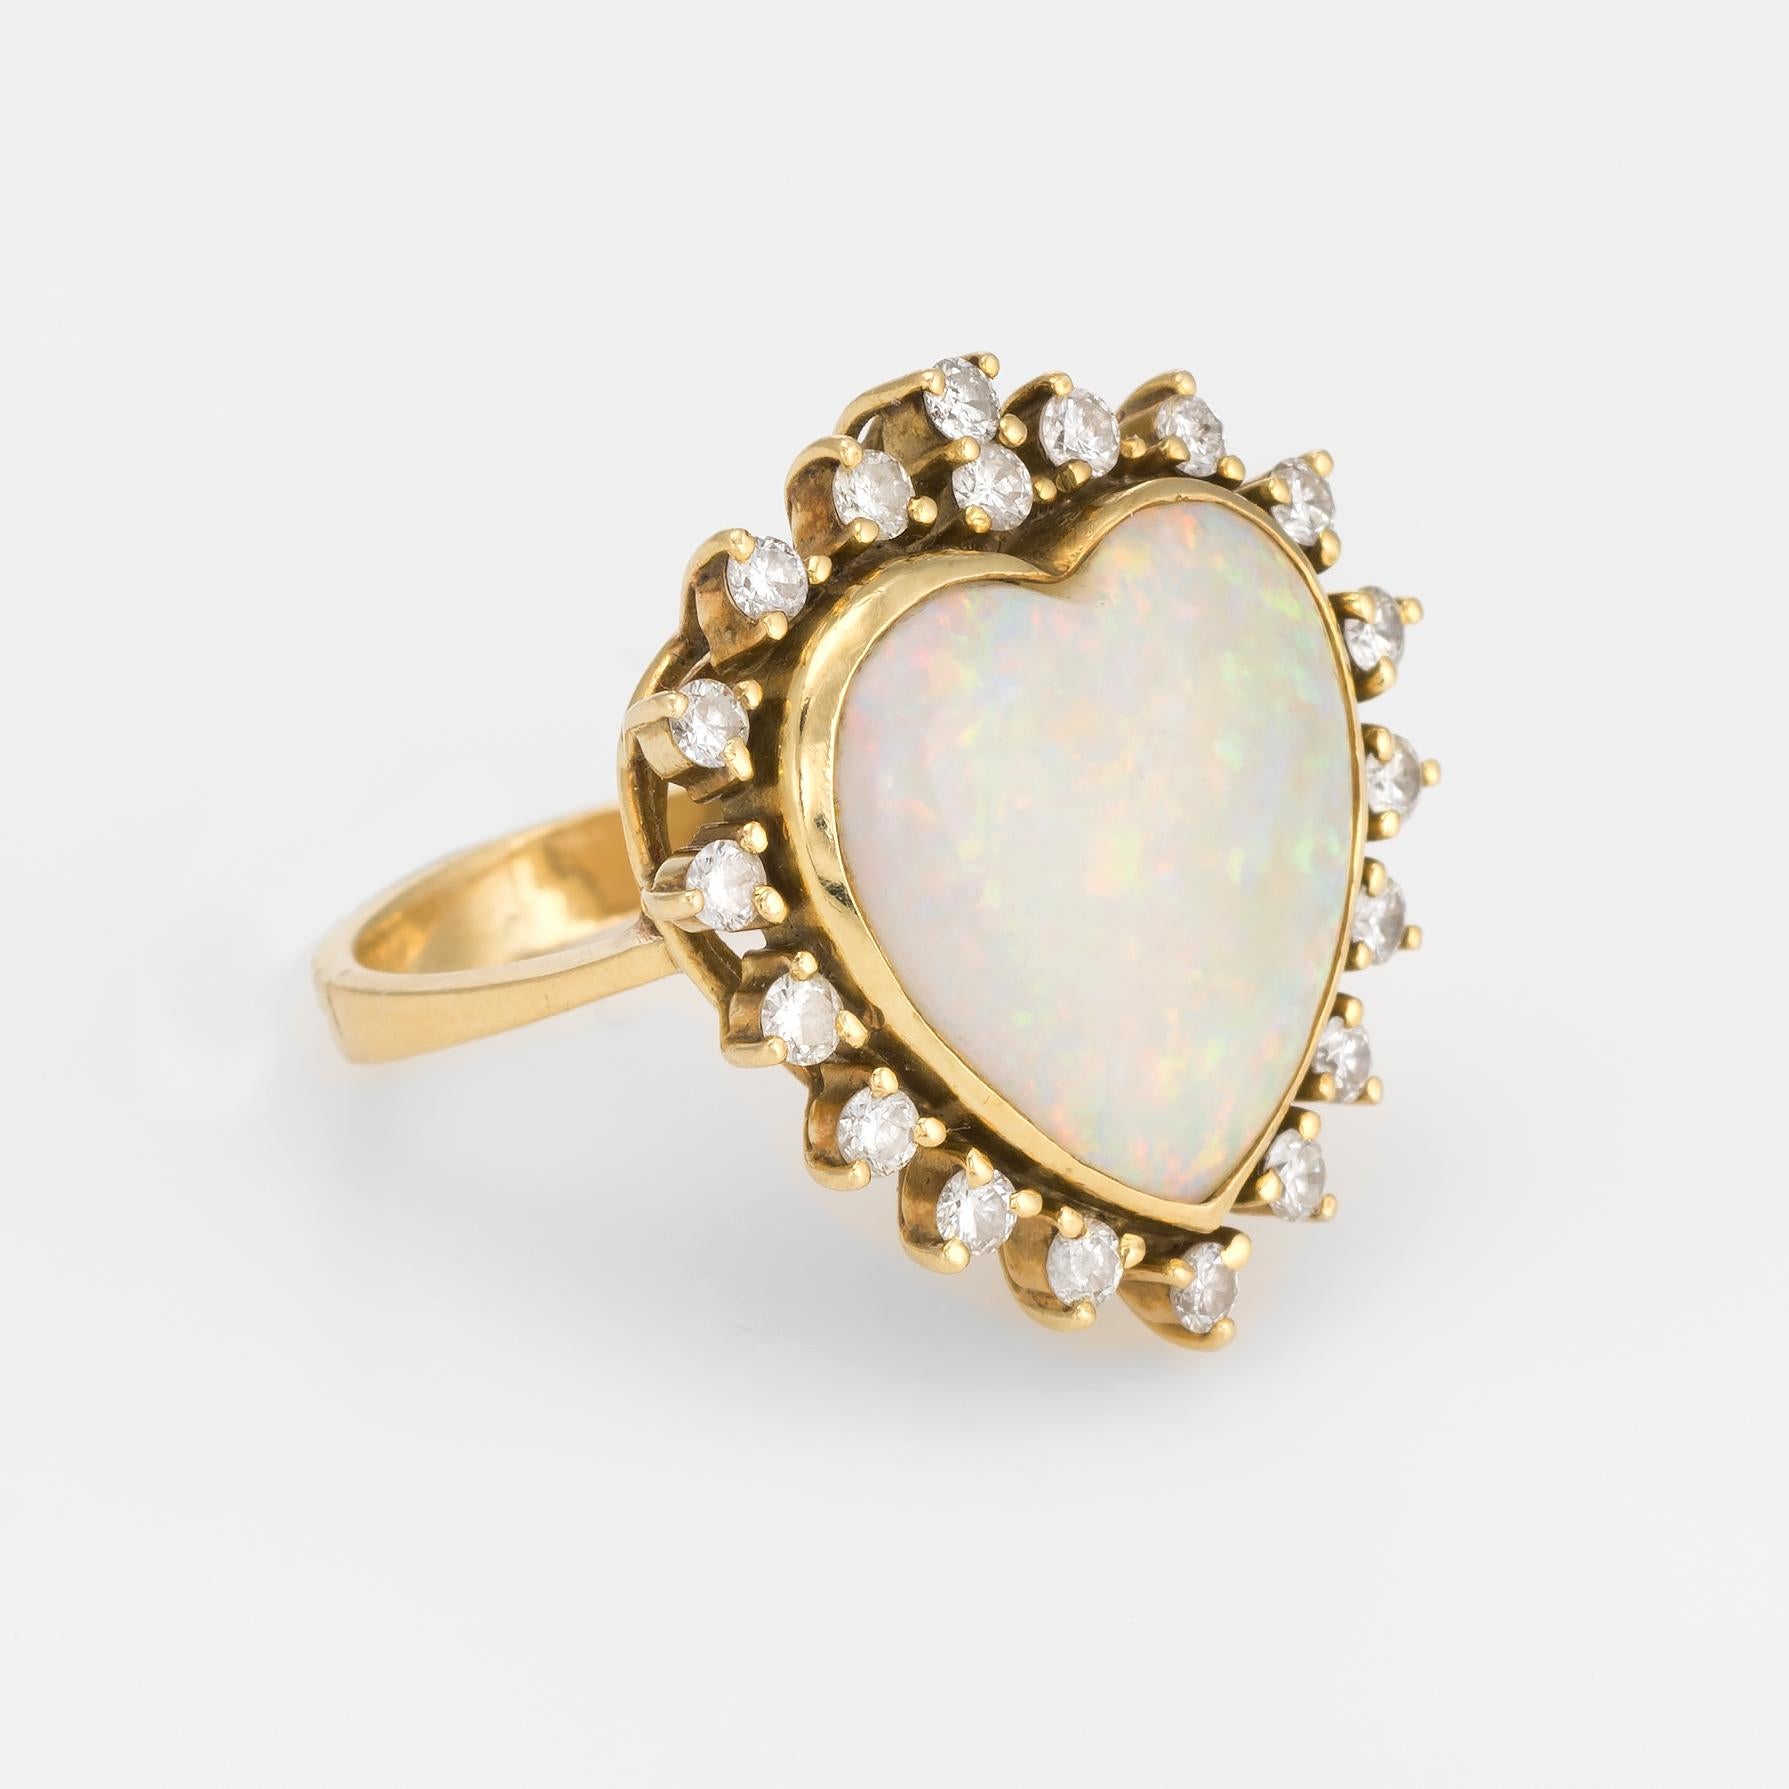 Finely detailed vintage opal & diamond heart cocktail ring (circa 1970s to 1980s), crafted in 18 karat yellow gold. 

Heart cut natural opal measures 15mm, accented with 19 estimated 0.03 carat round brilliant cut diamonds. The total diamond weight